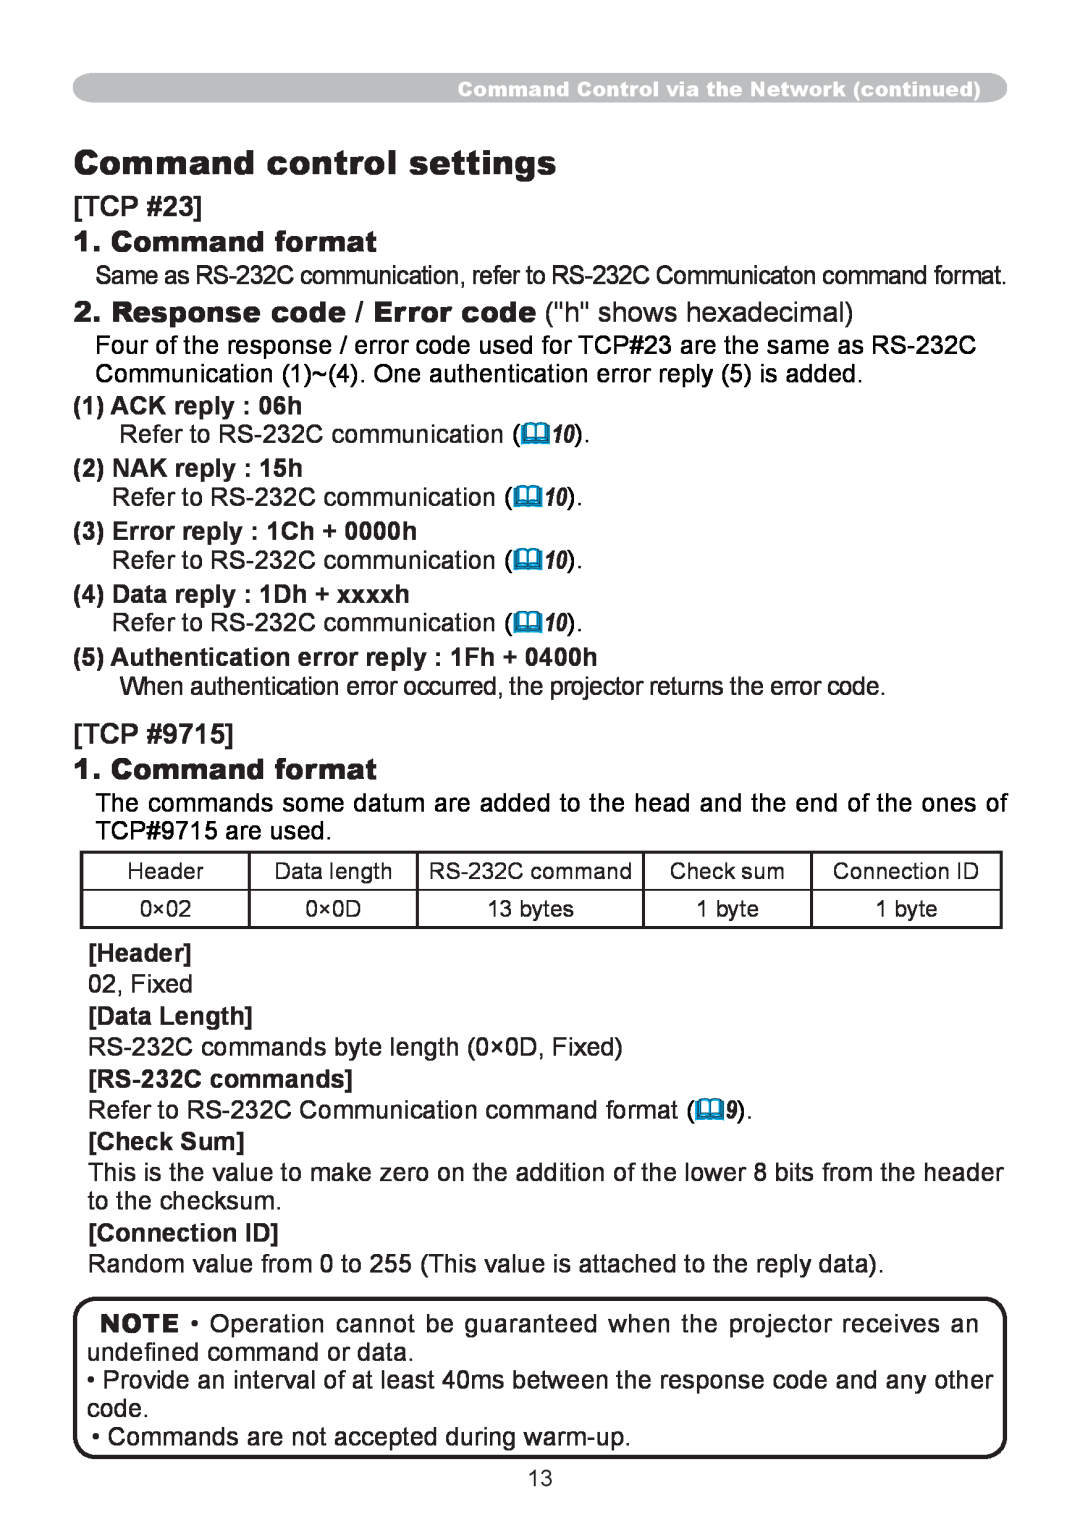 CP TECHNOLOGIES CP-A300N, CP-A220N manual Command control settings, TCP #23 1. Command format, TCP #9715 1. Command format 